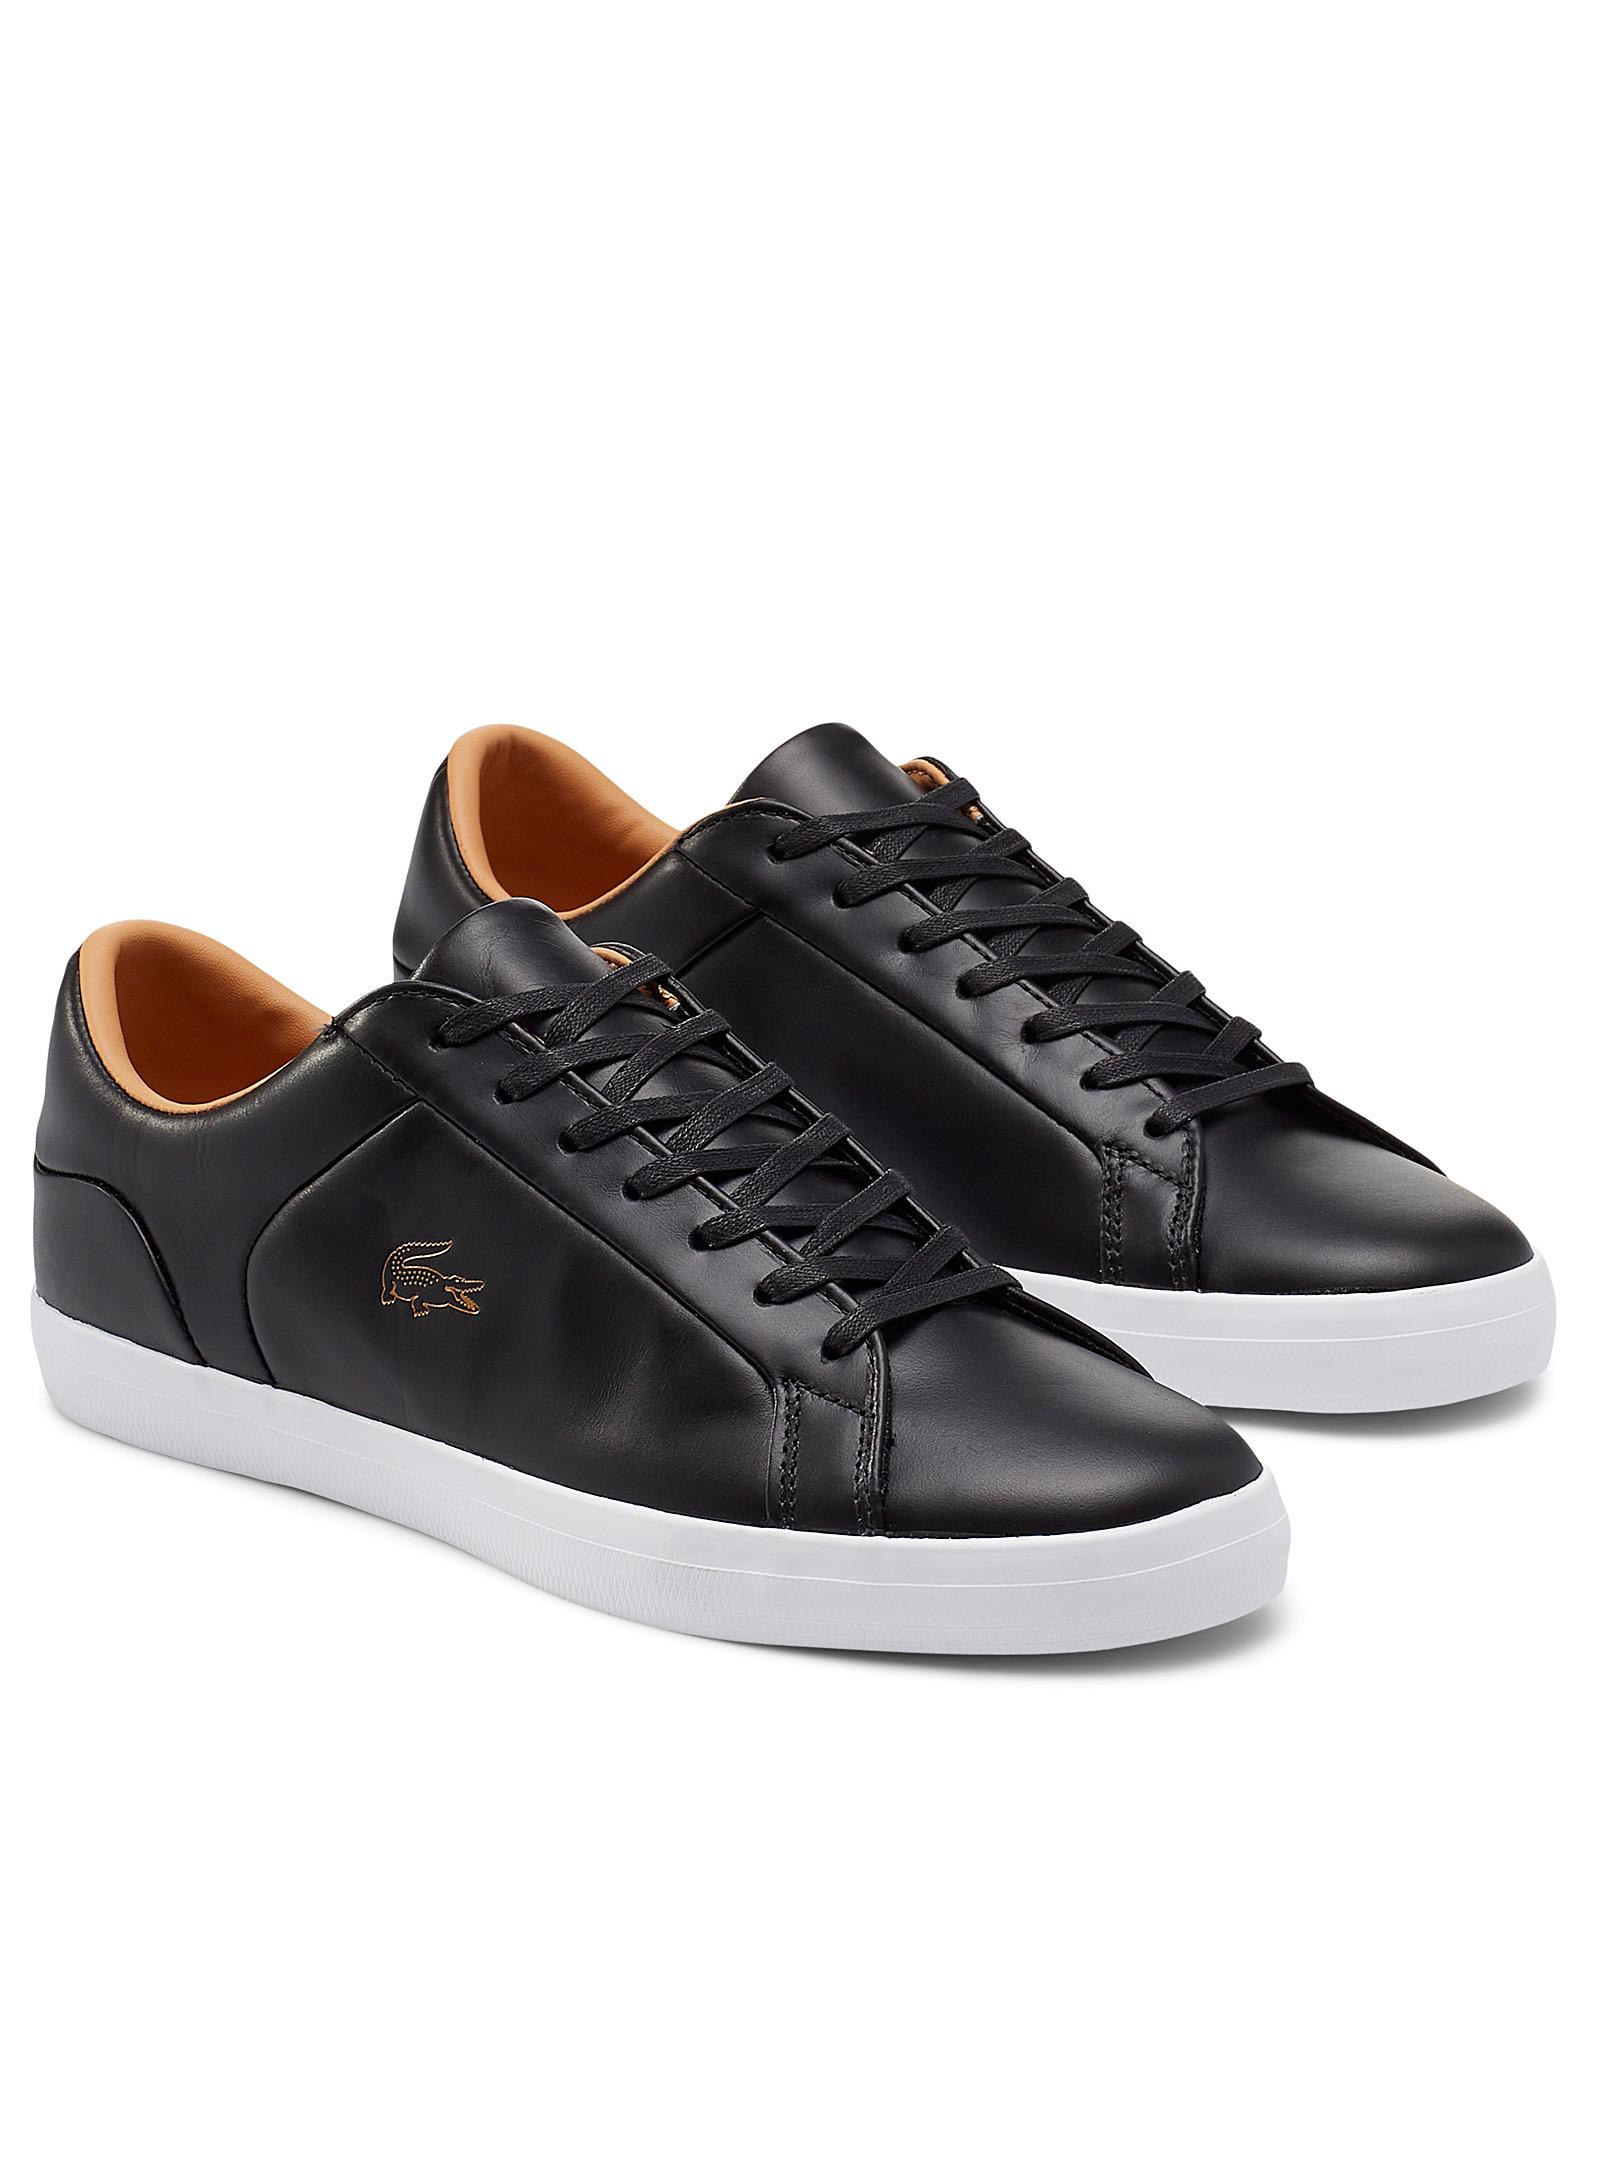 NEW Lacoste Men's Lerond Fashion Lace Up Casual Sneakers Fashion Leather Shoes 